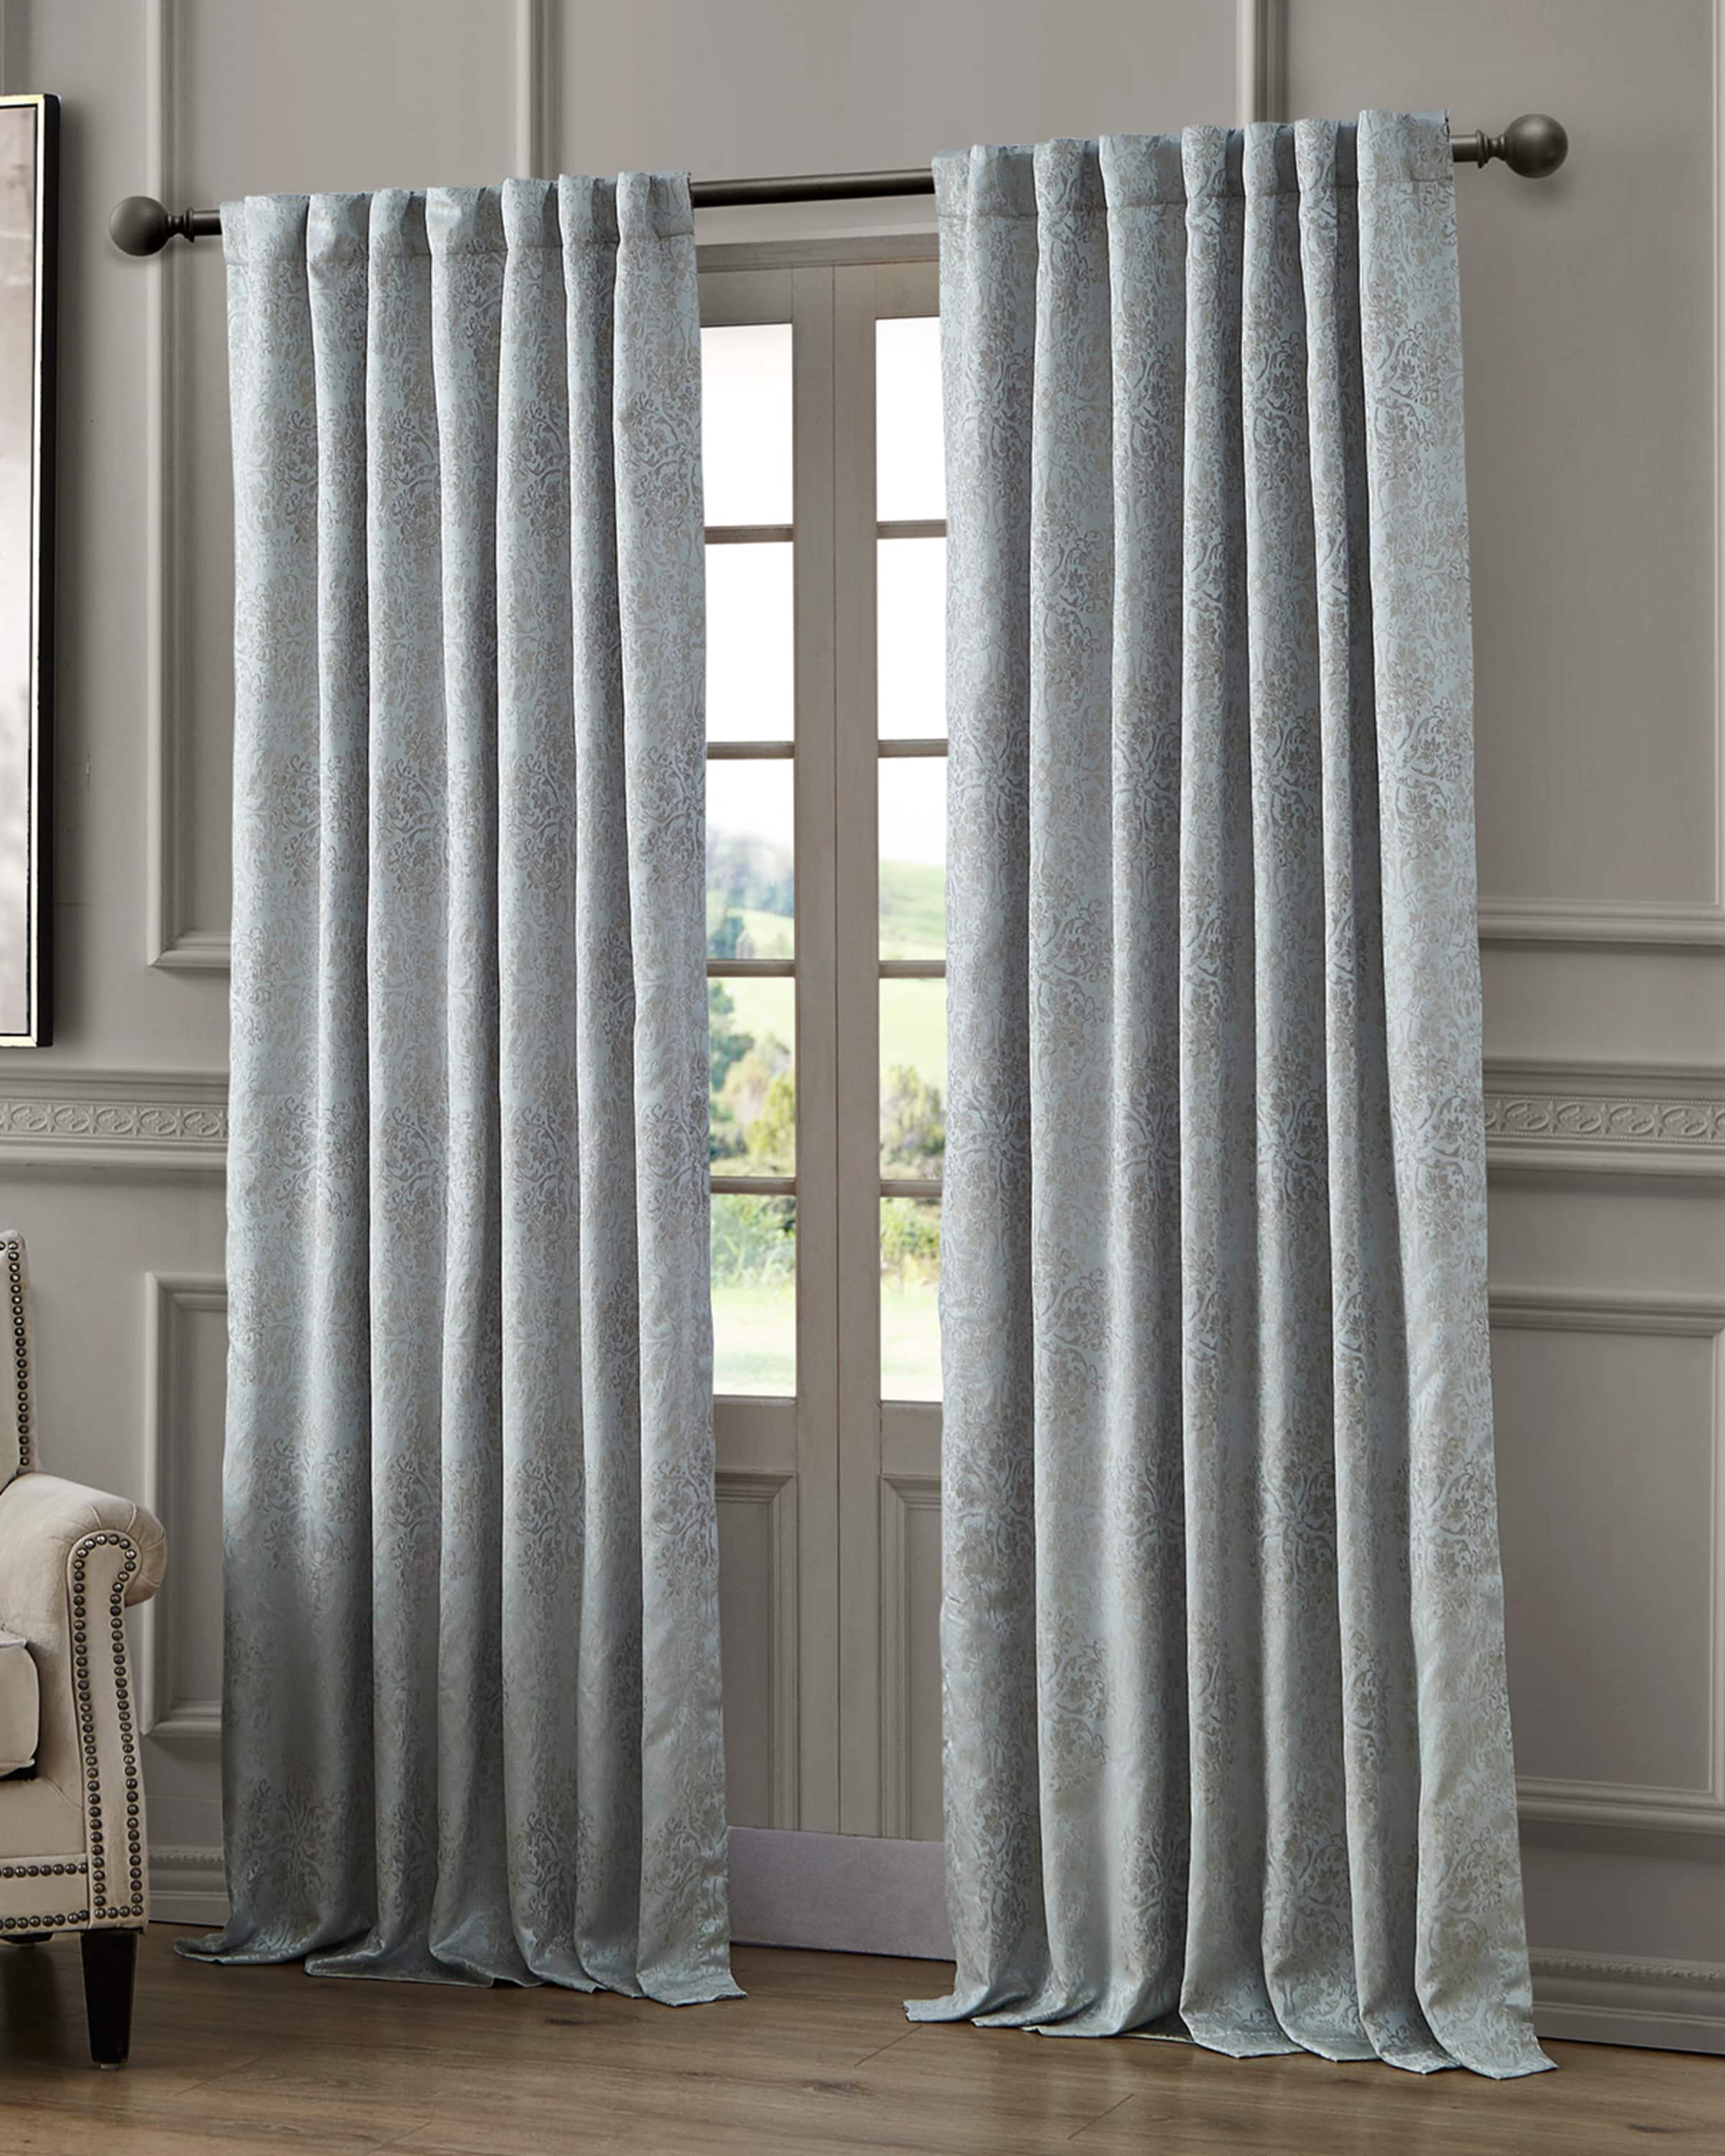 Waterford Delia Back Tab Curtain Panel, 96"